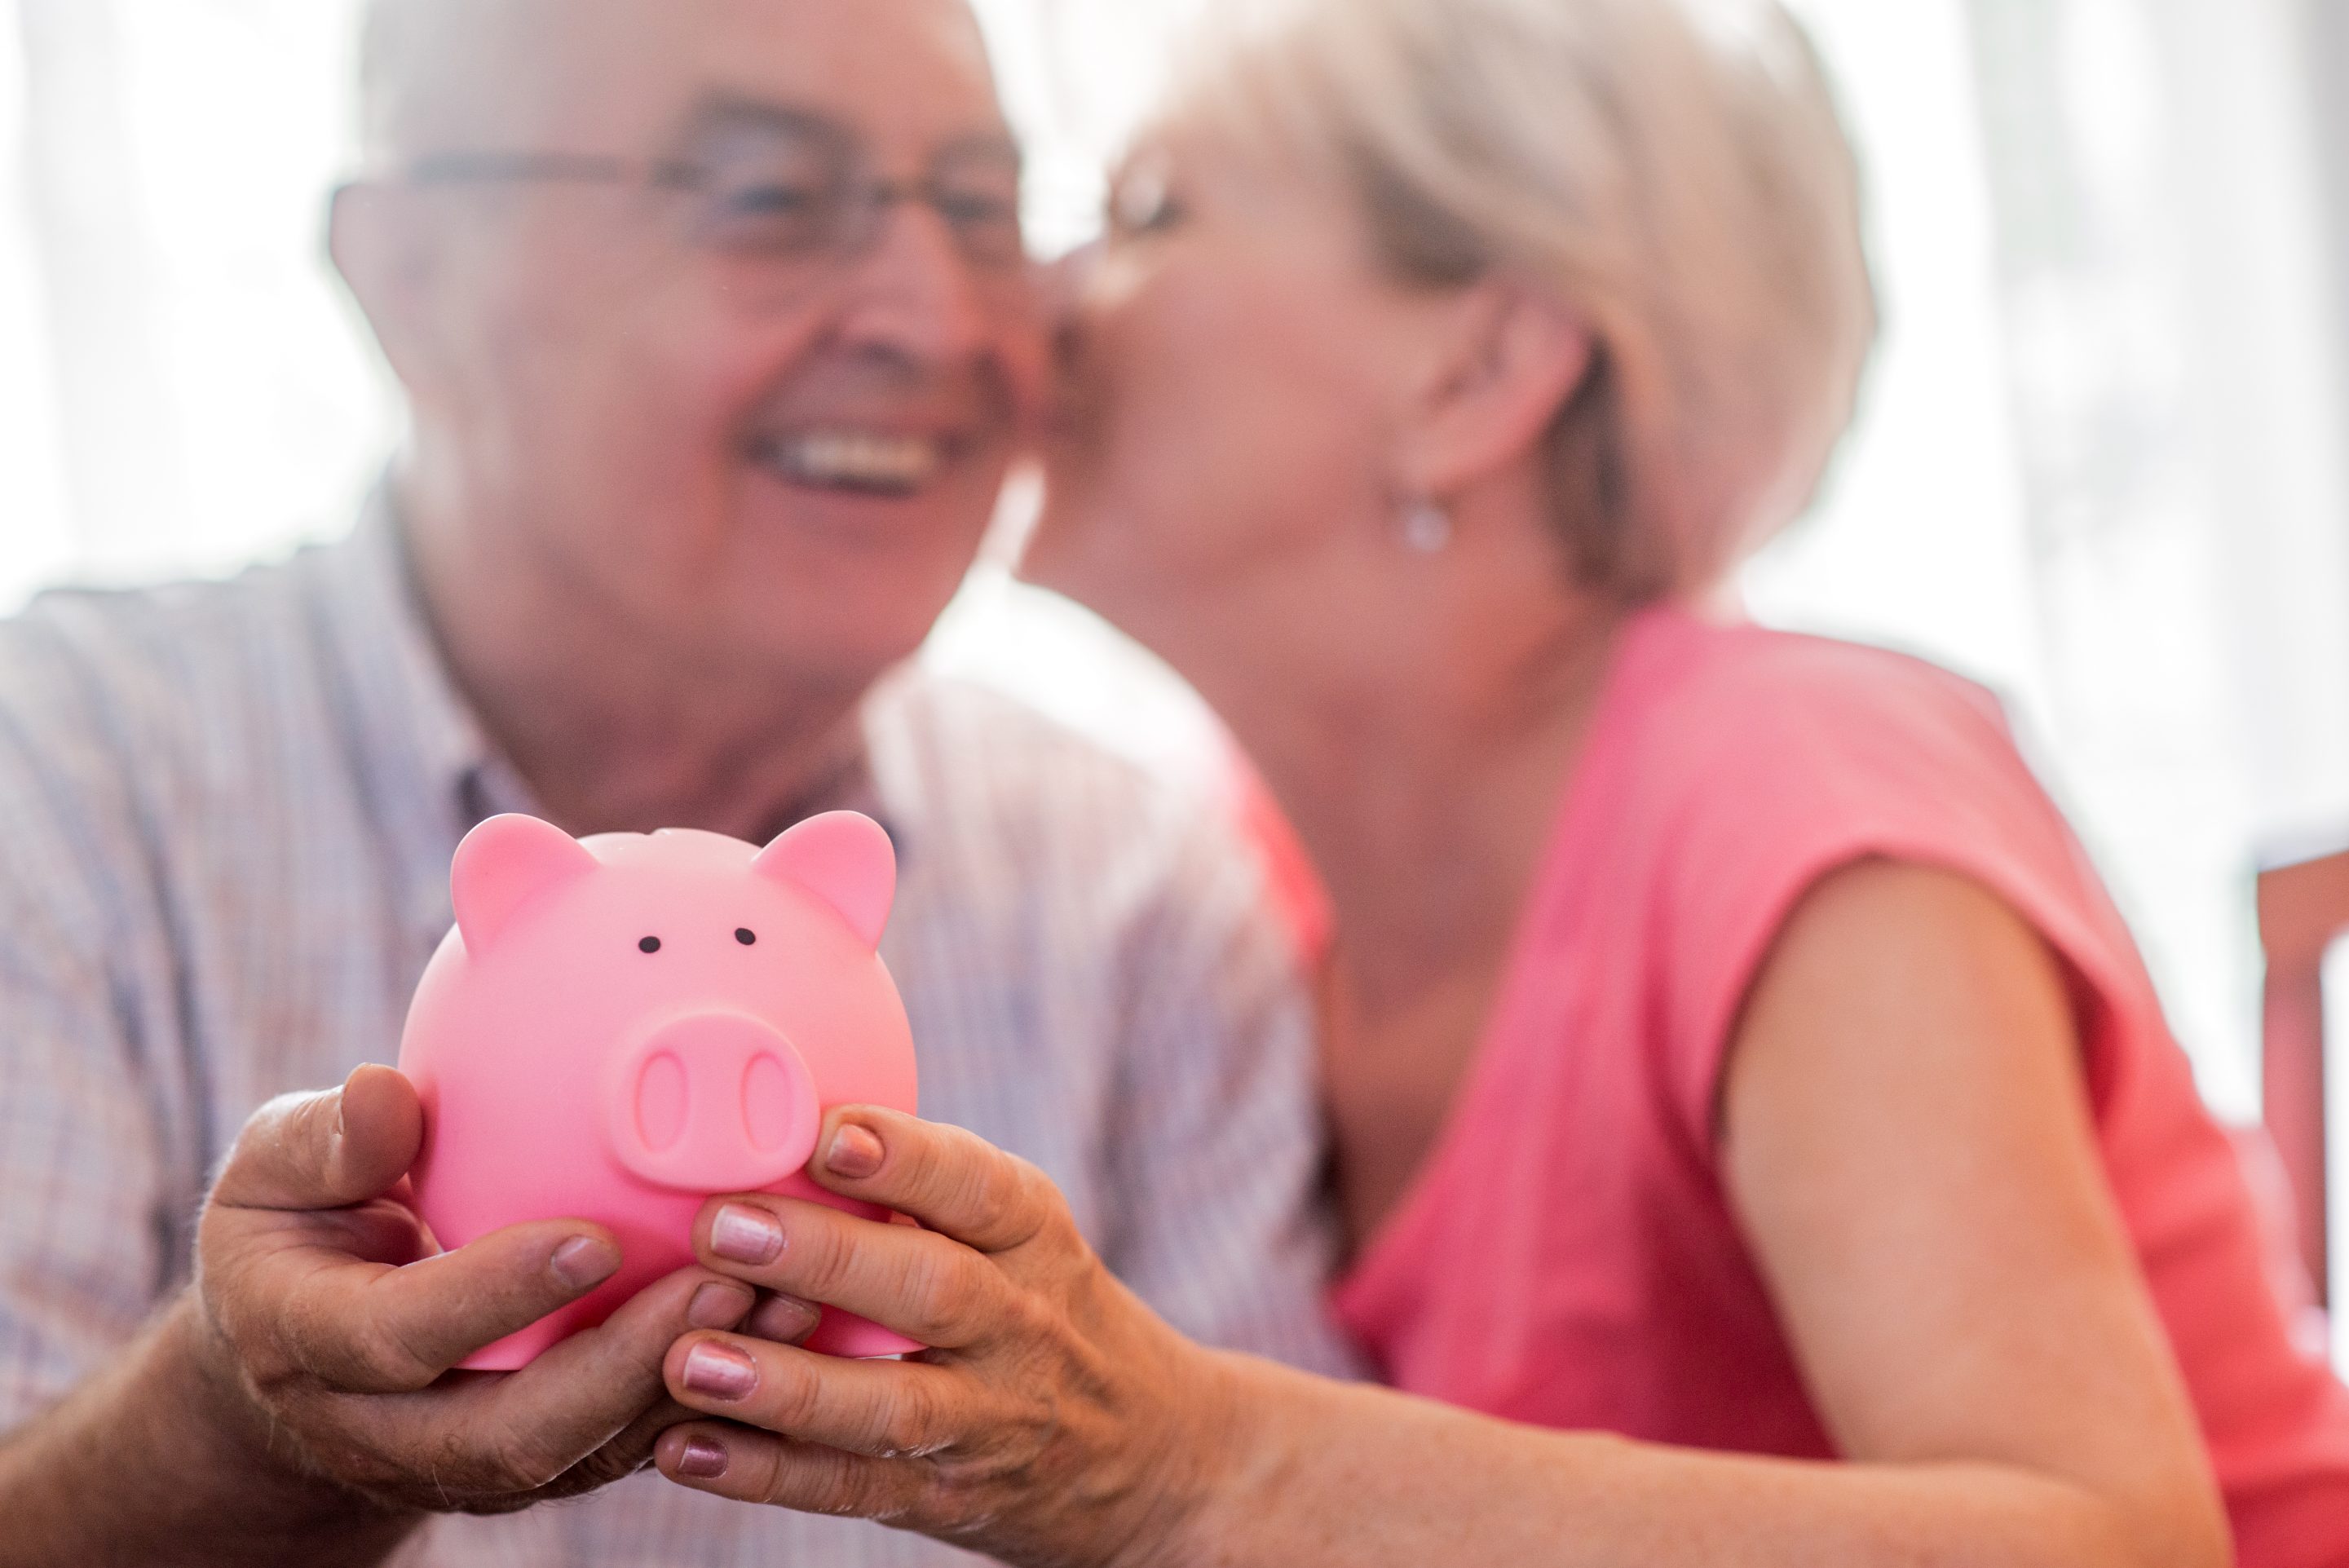 Thrift Savings Plan: Should I withdraw from my Thrift Savings Plan (TSP) to pay my Entry Fee in a CCRC or Life Plan Community?